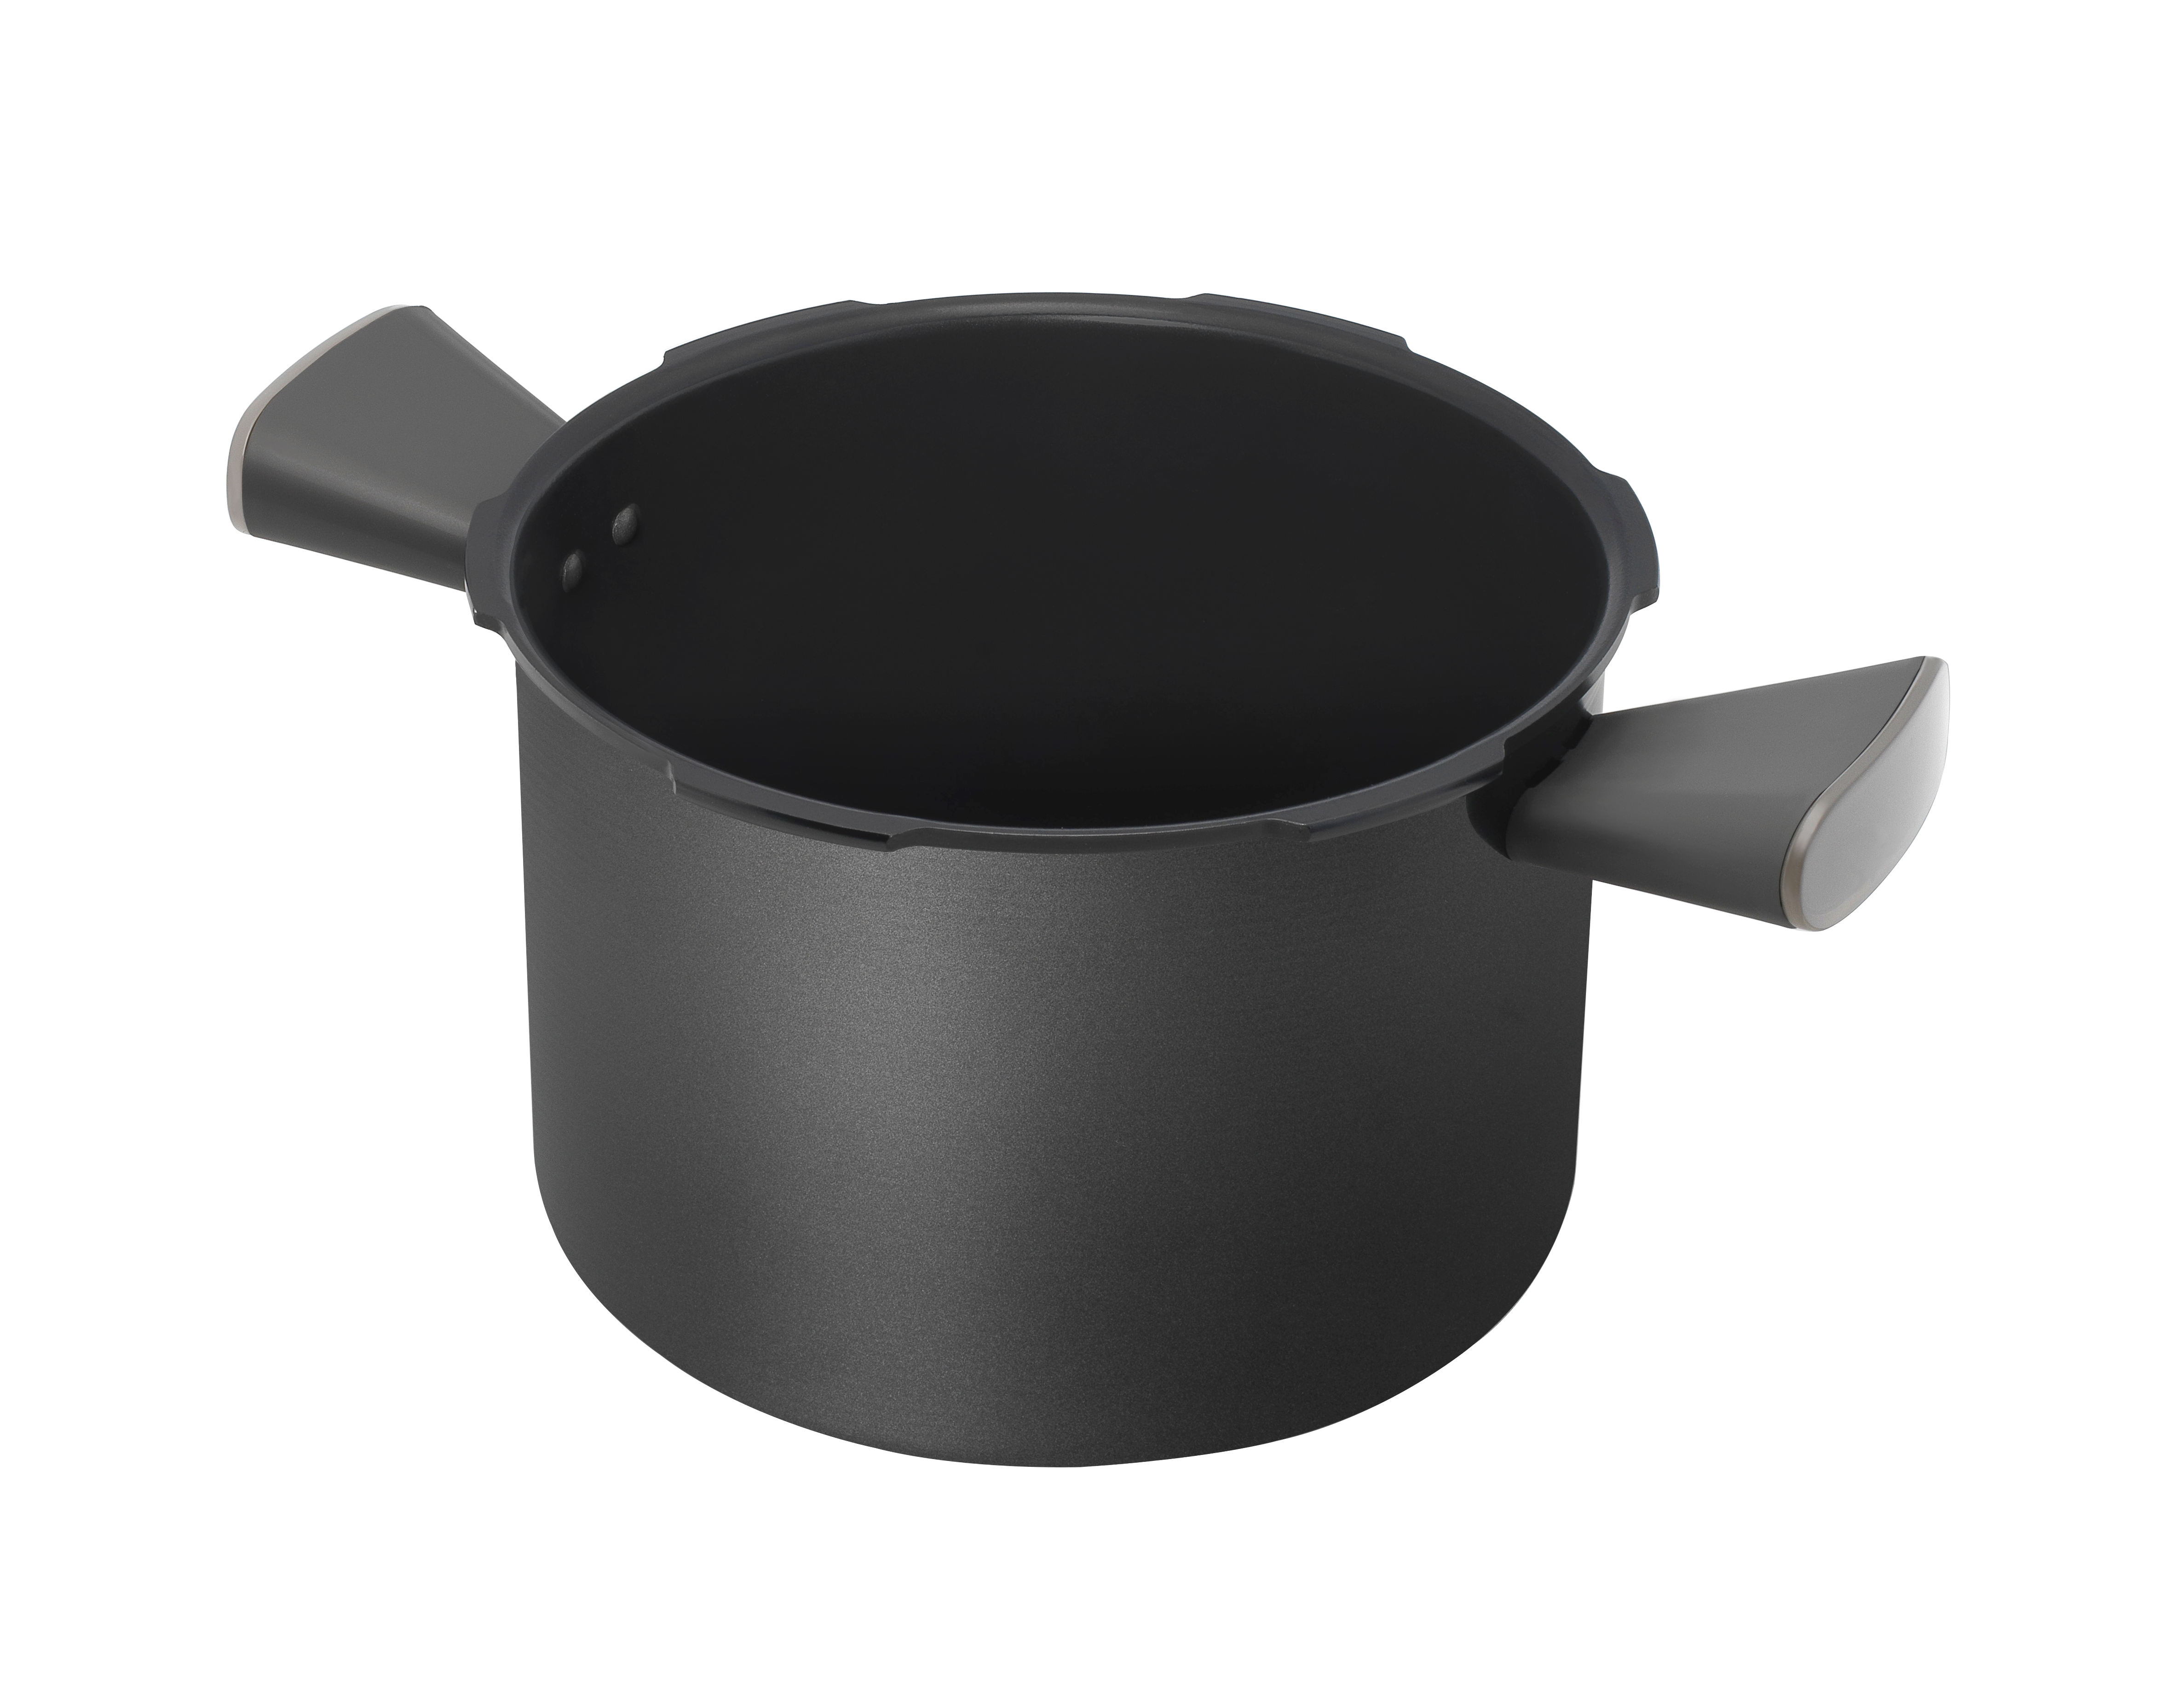 Tefal Cook4me Accessory - Spare Bowl -  XA605011 (for Cook4me/Cook4me+)